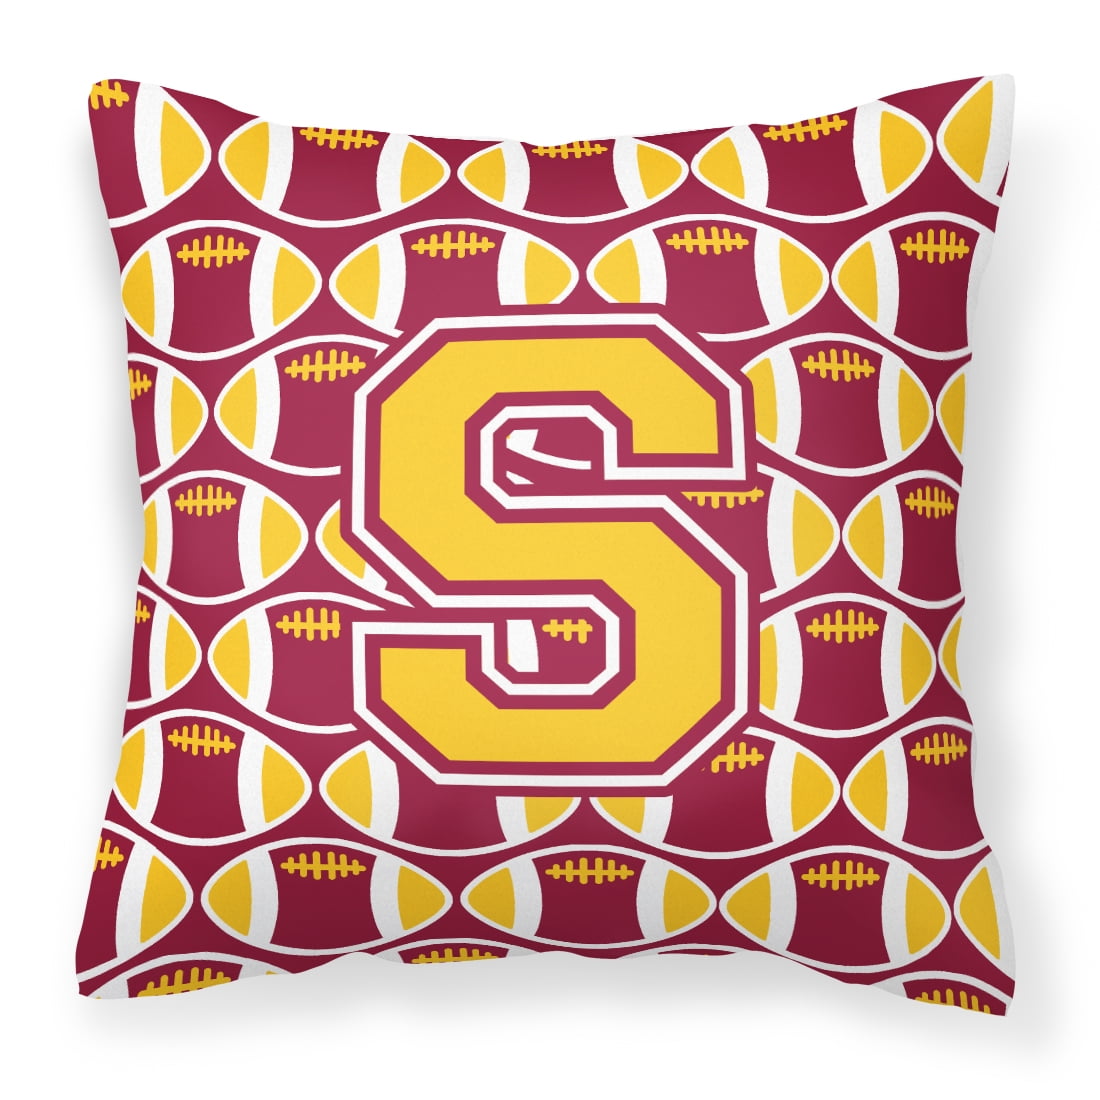 Letter S Football Maroon and Gold Fabric Decorative Pillow - Walmart.com